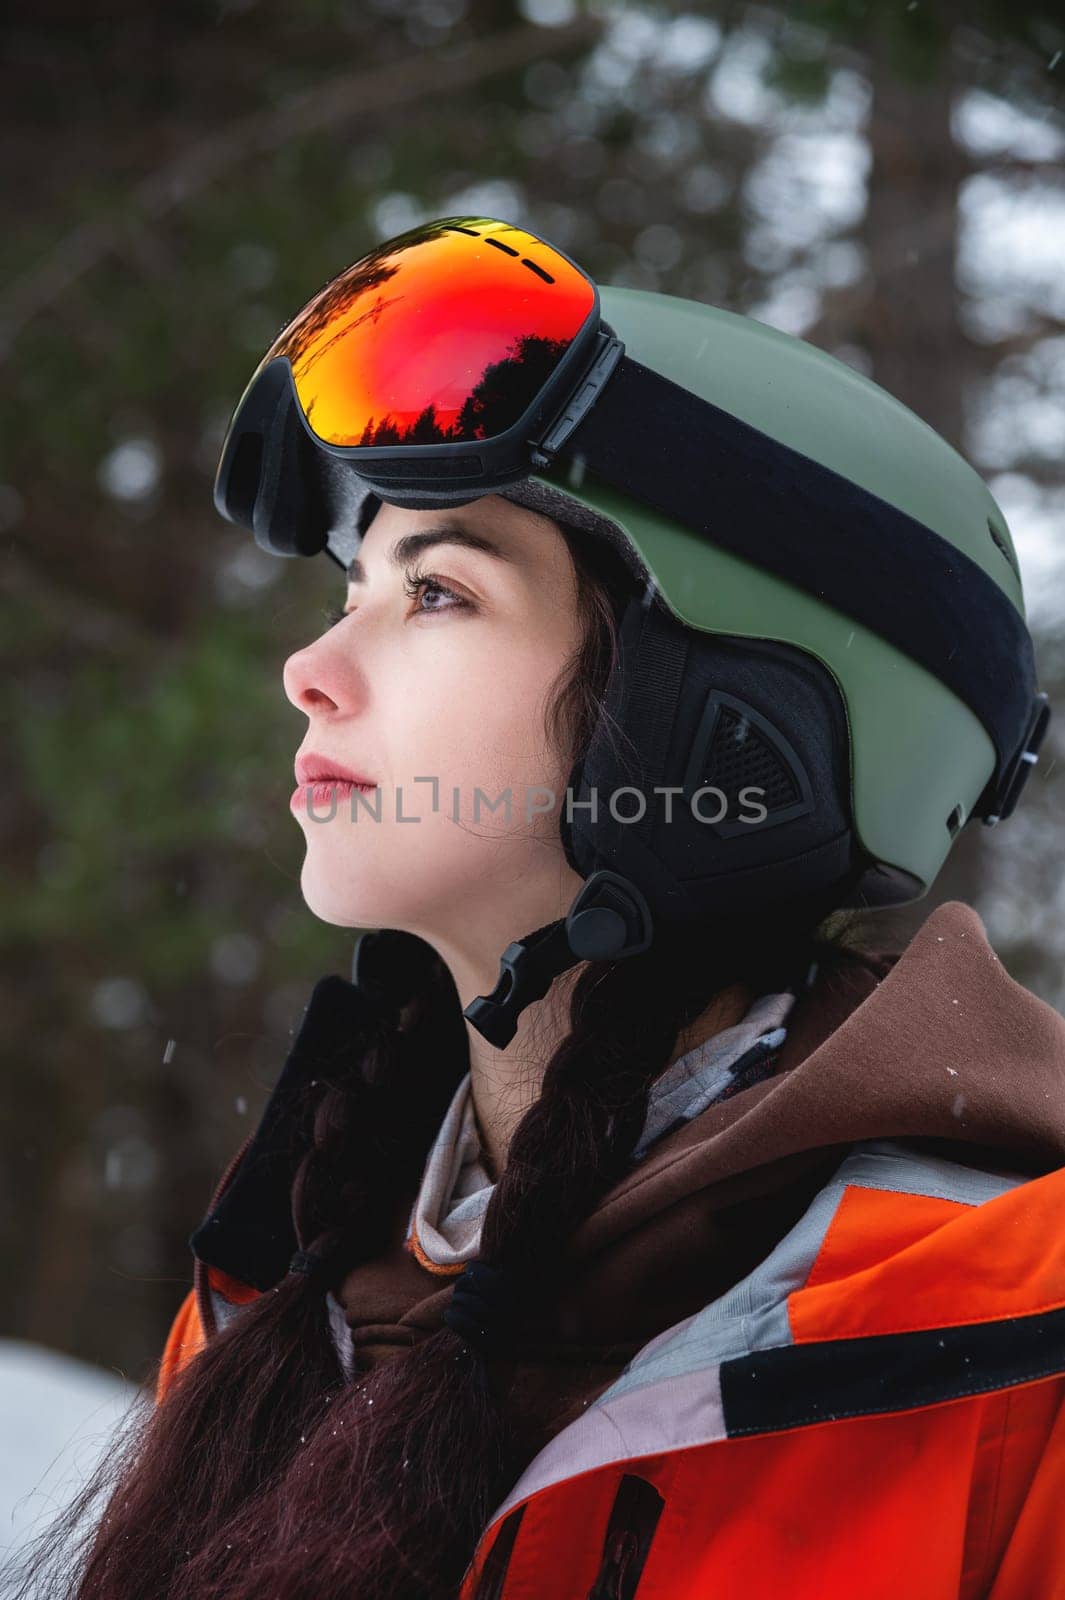 Skier, skiing, winter sports, female skier portrait. A beautiful girl stands against the backdrop of snow-capped mountains and looks to the side, freeride by yanik88